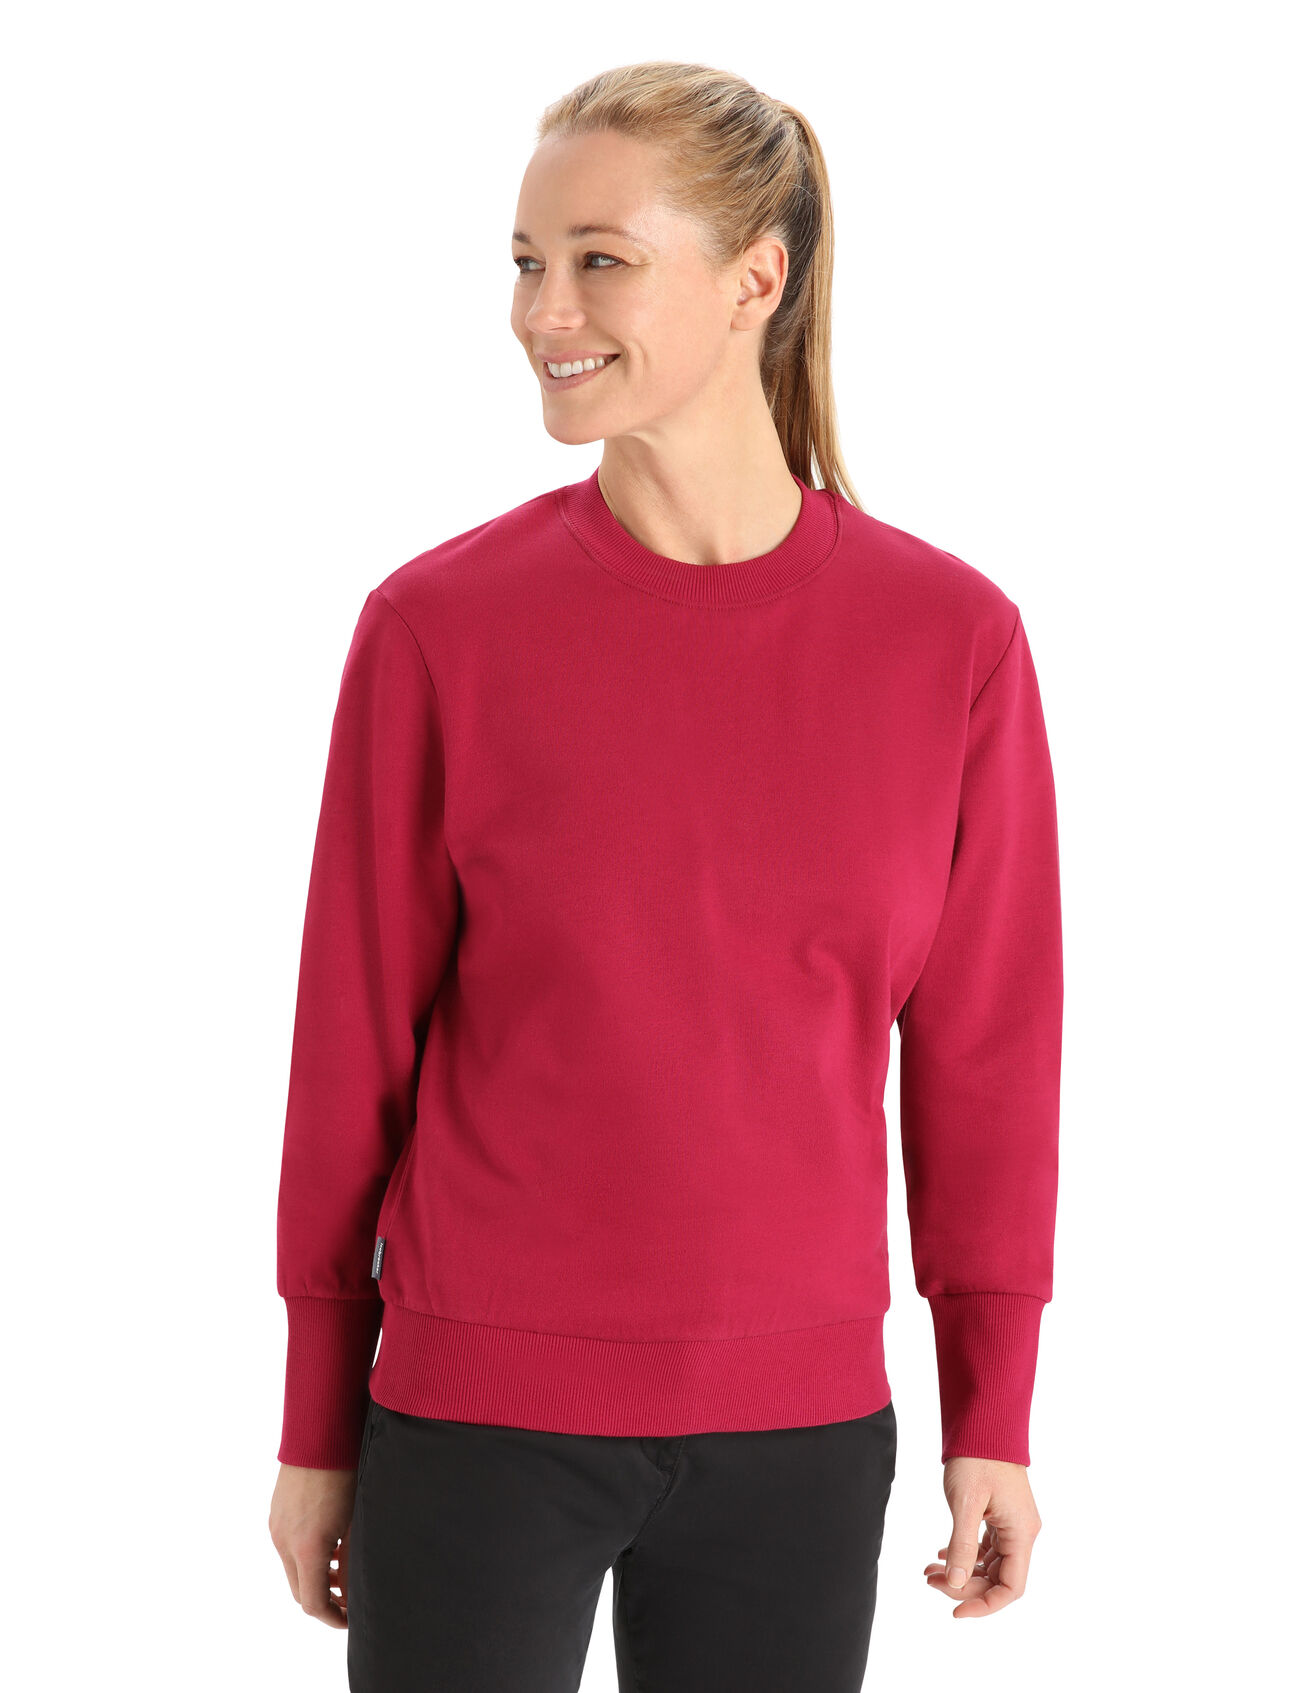 Womens Merino Central II Long Sleeve Sweatshirt A versatile, everyday pullover that goes anywhere in comfort, the Central II Long Sleeve Sweatshirt features a sustainable blend of natural merino wool and soft organic cotton.